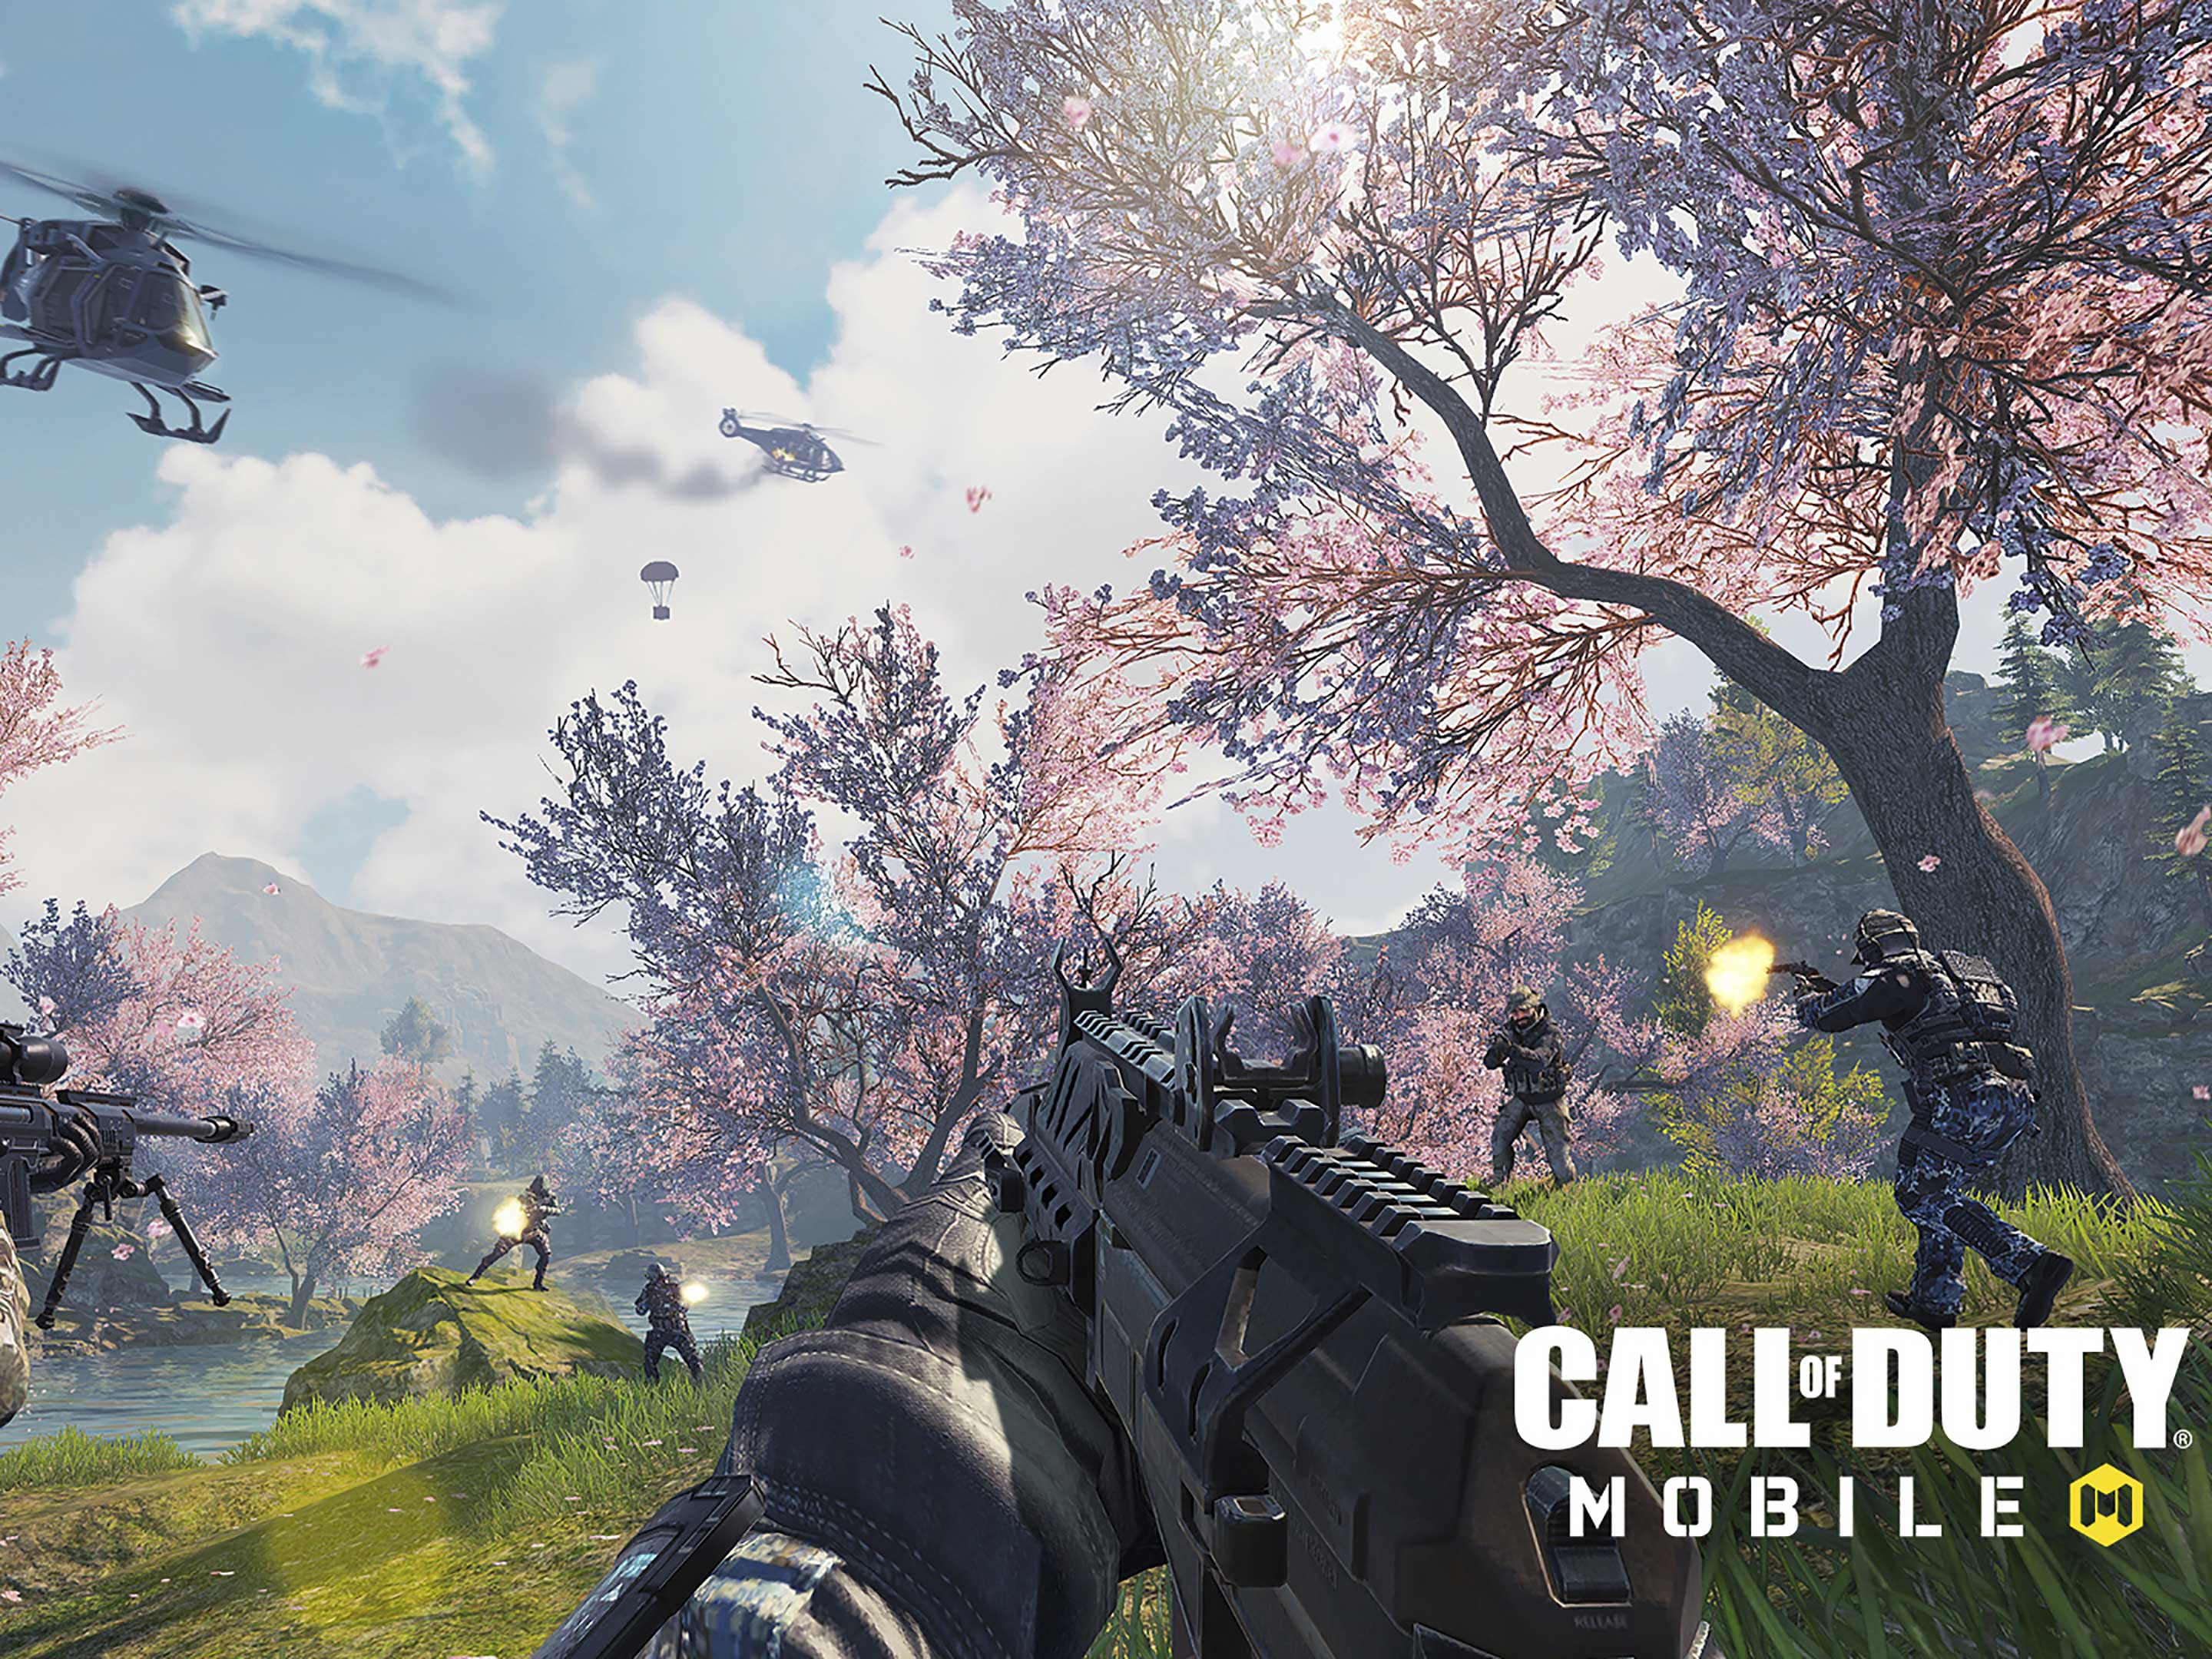 Call of Duty: Mobile battle royale